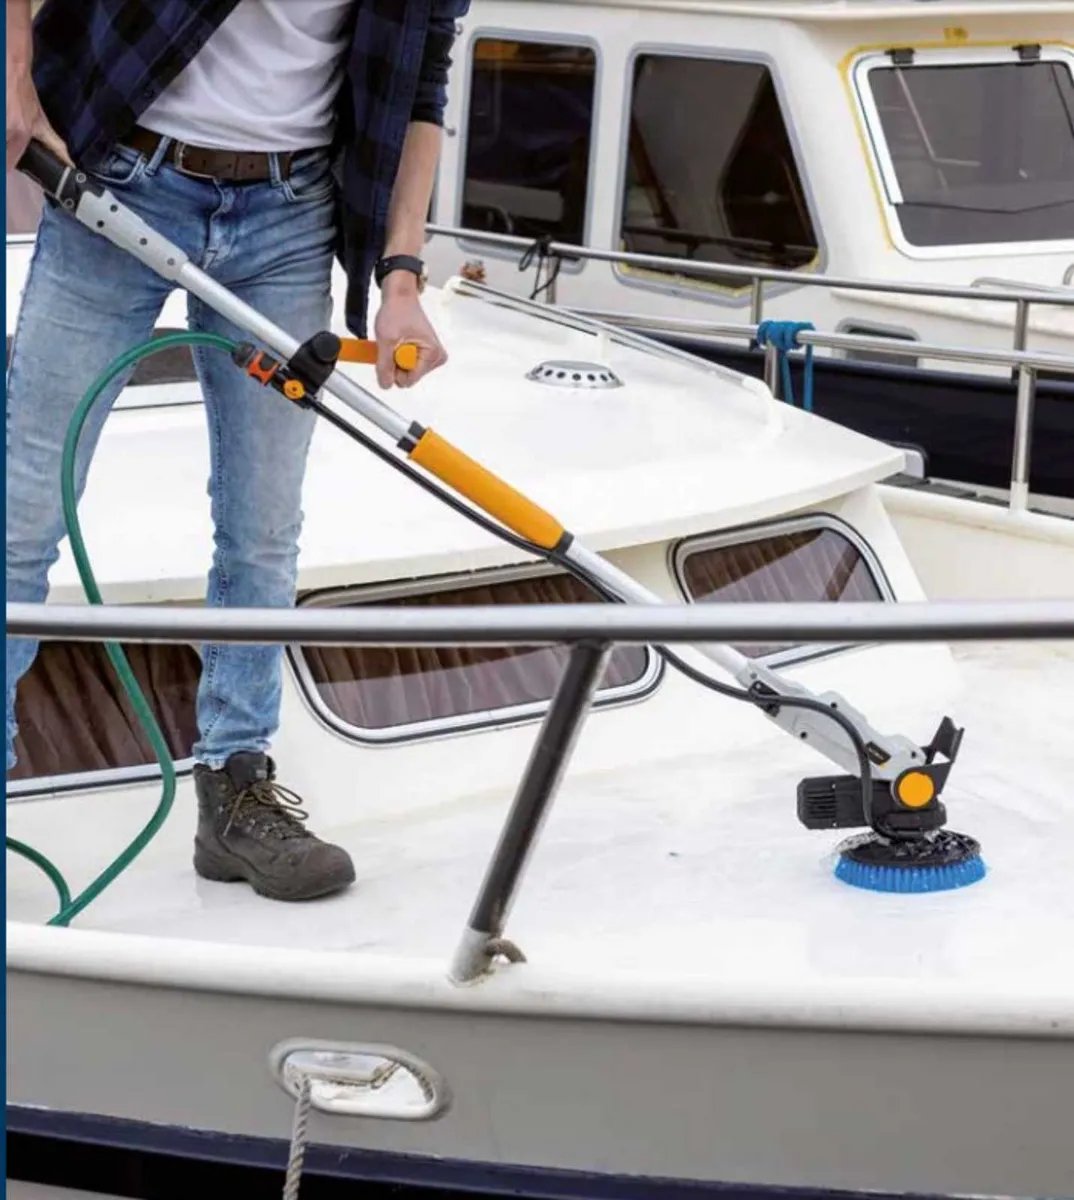 Take the work out of cleaning your Boat